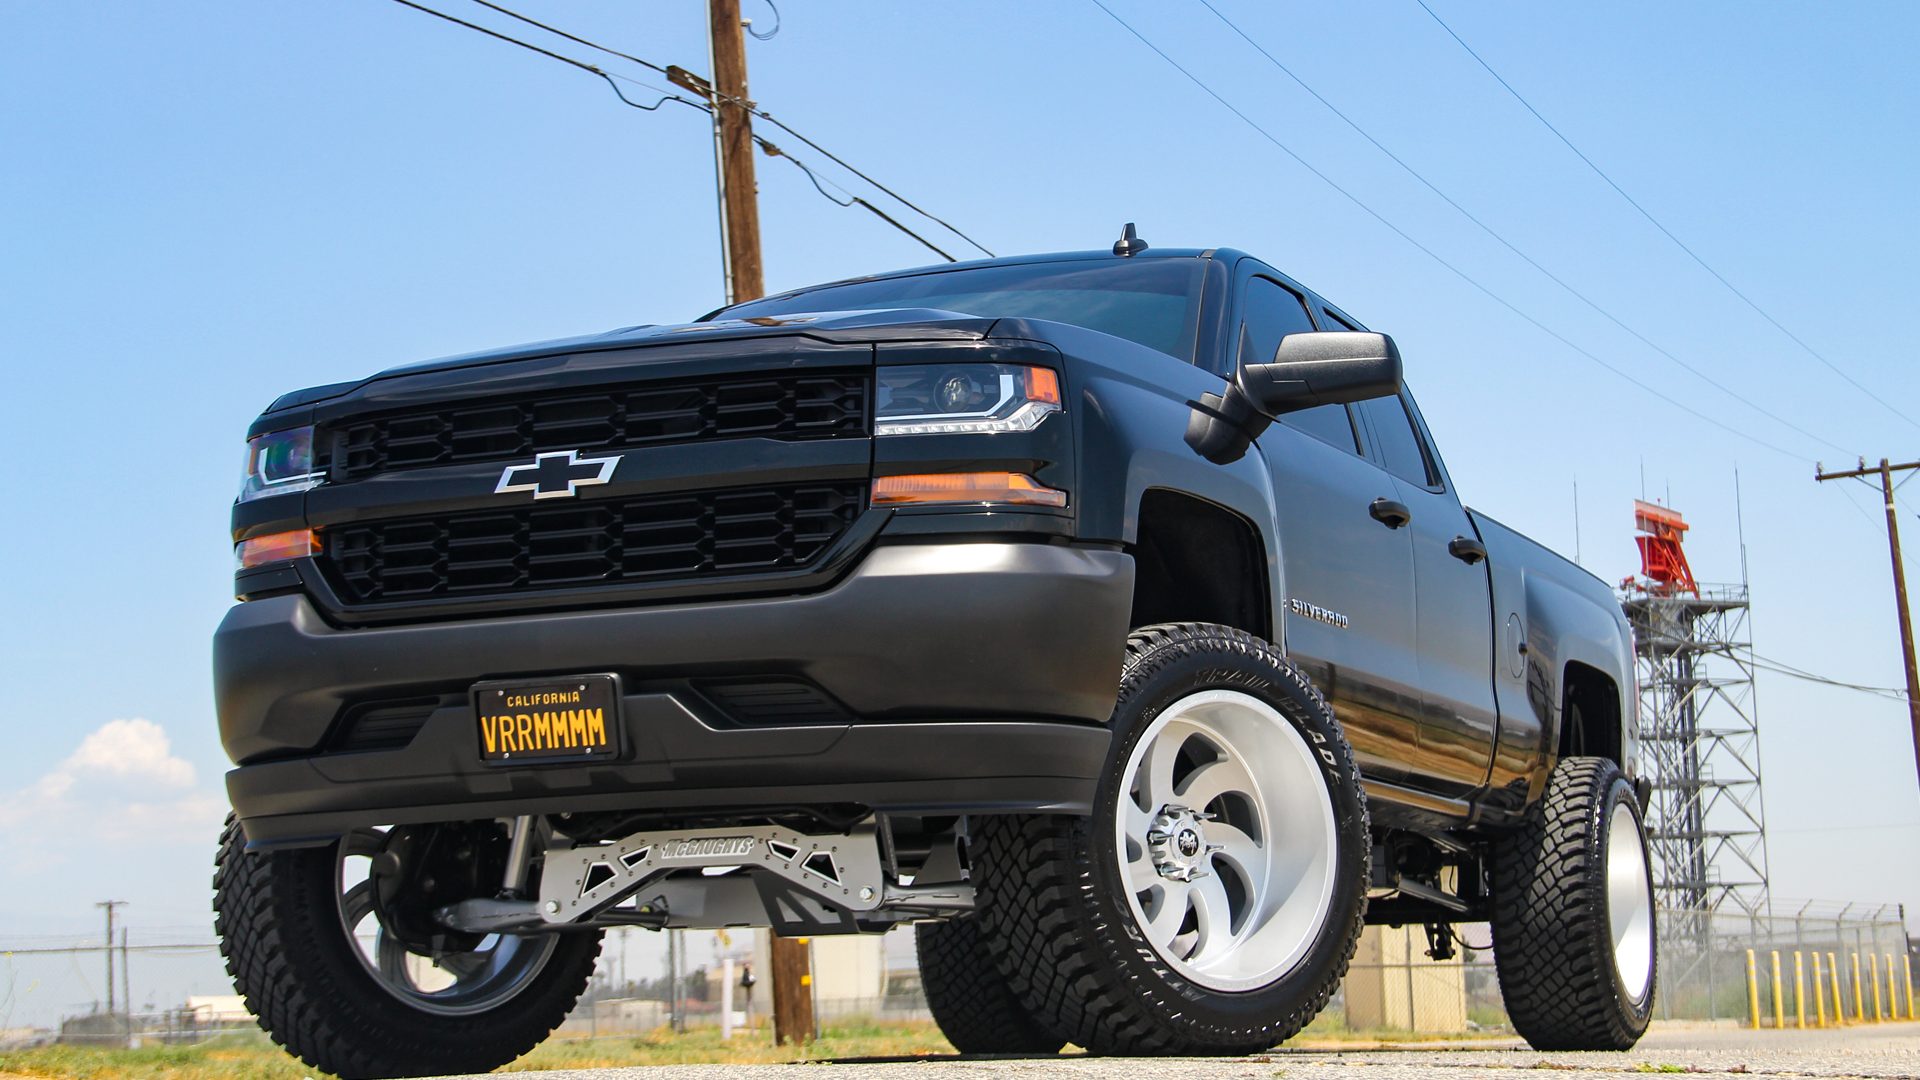 M07 Off-Road Monster Wheels on a Lifted Chevrolet Silverado